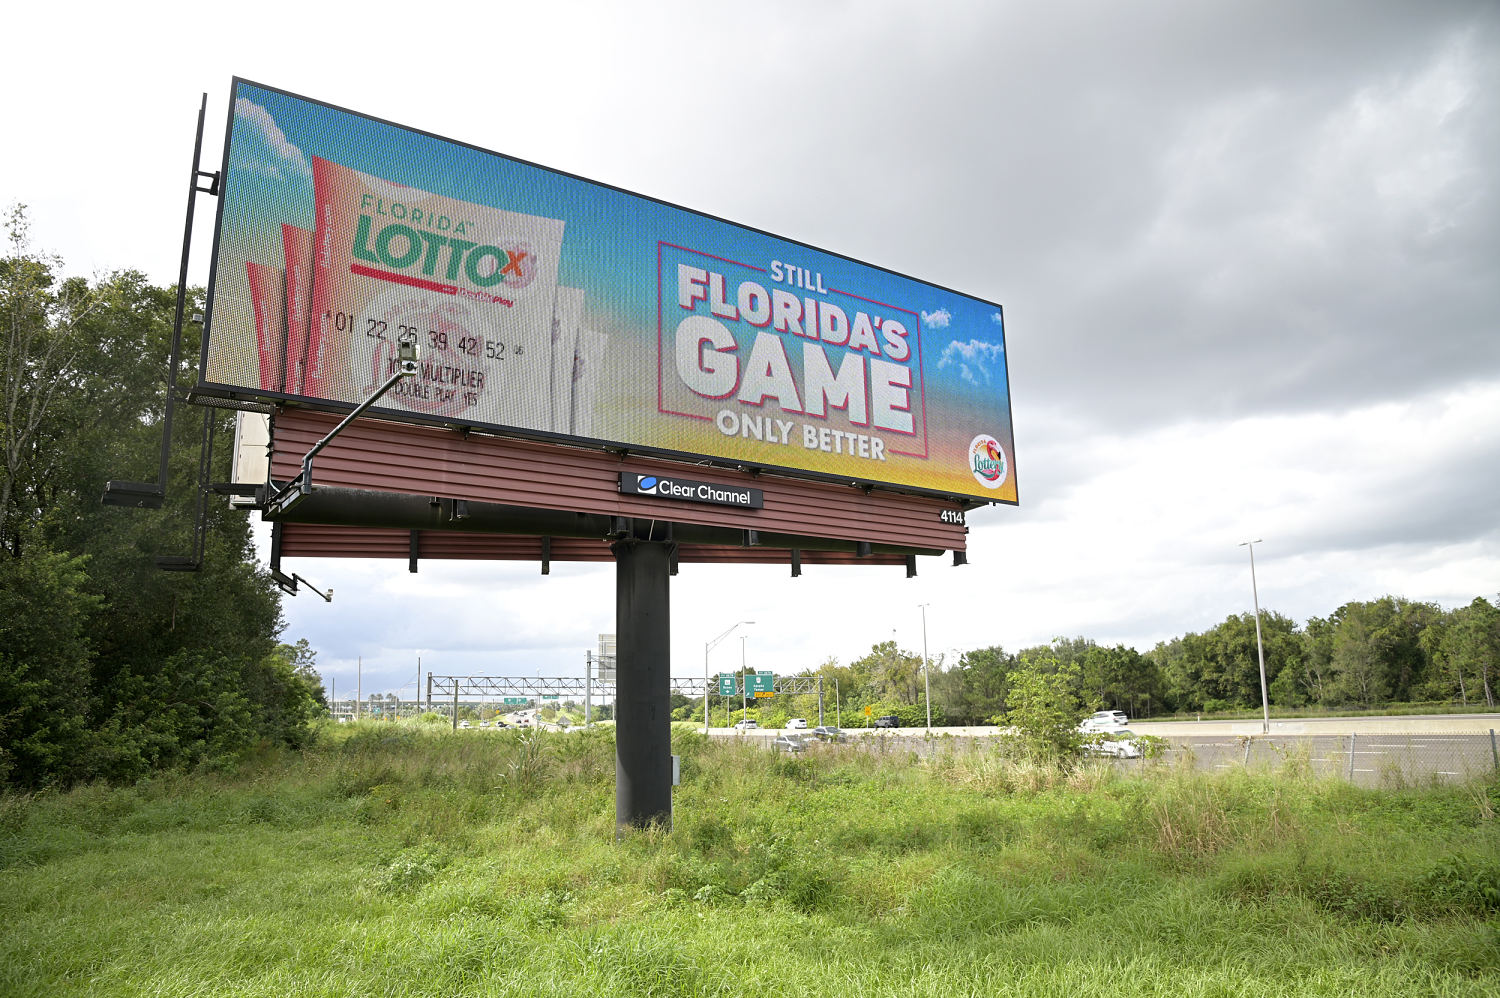 A $44 million lotto ticket in Florida has expired. Here’s what will happen to the money